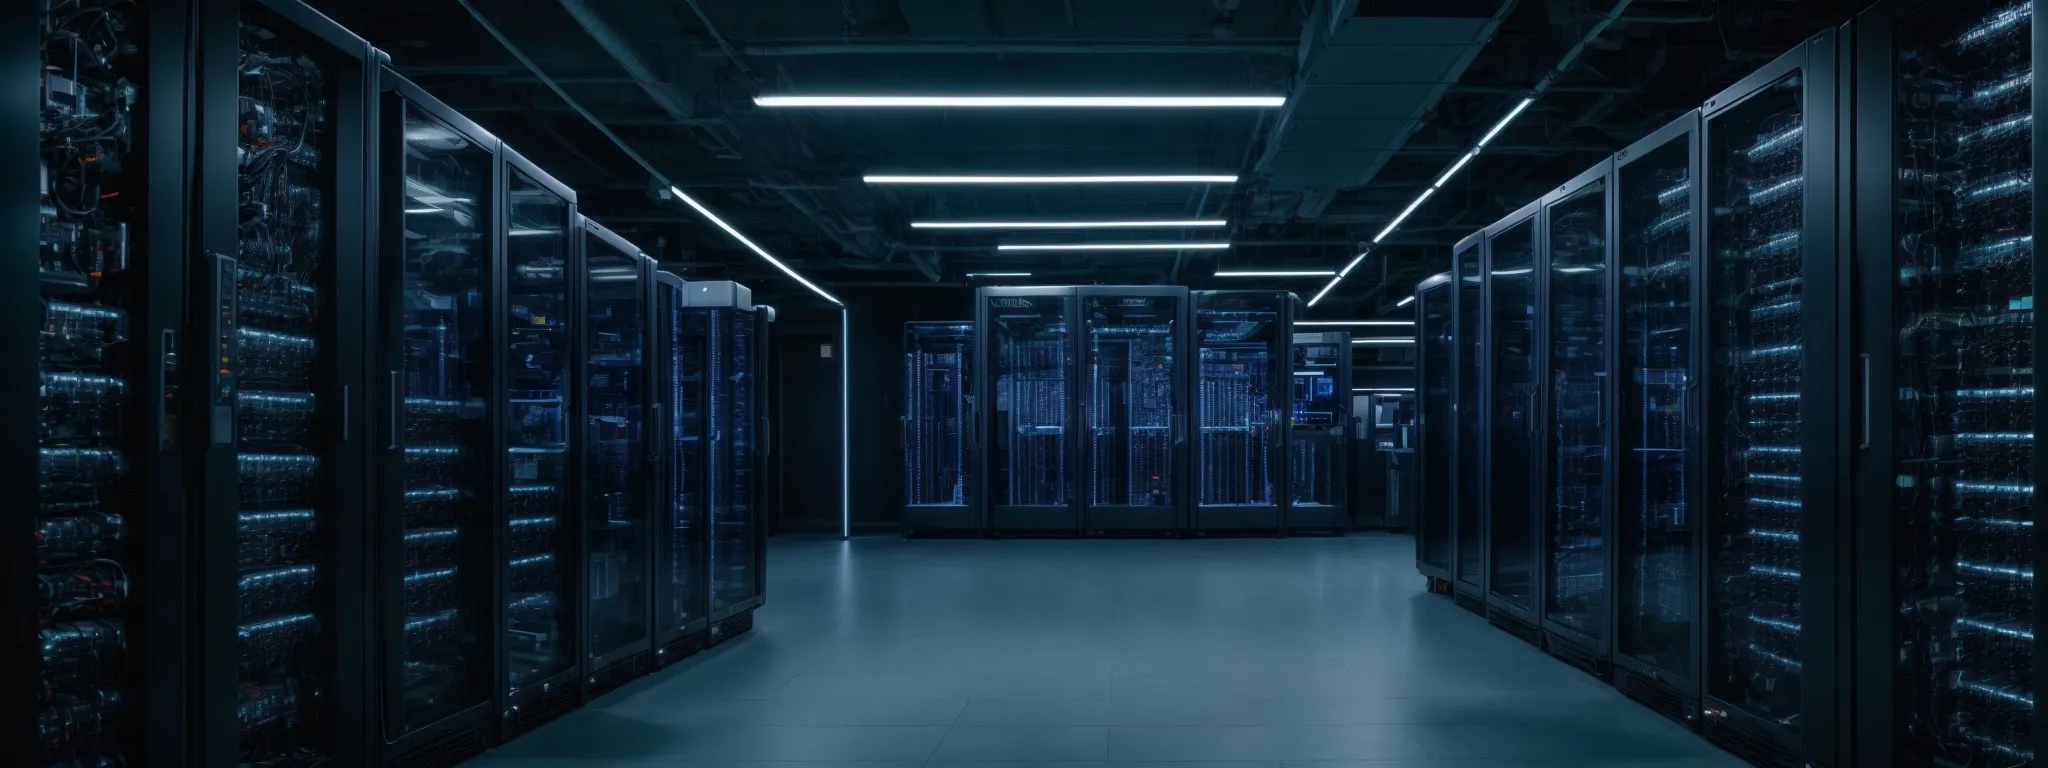 a server room with rows of modern equipment illuminated by led lights, symbolizing secure and stable internet hosting facilities.